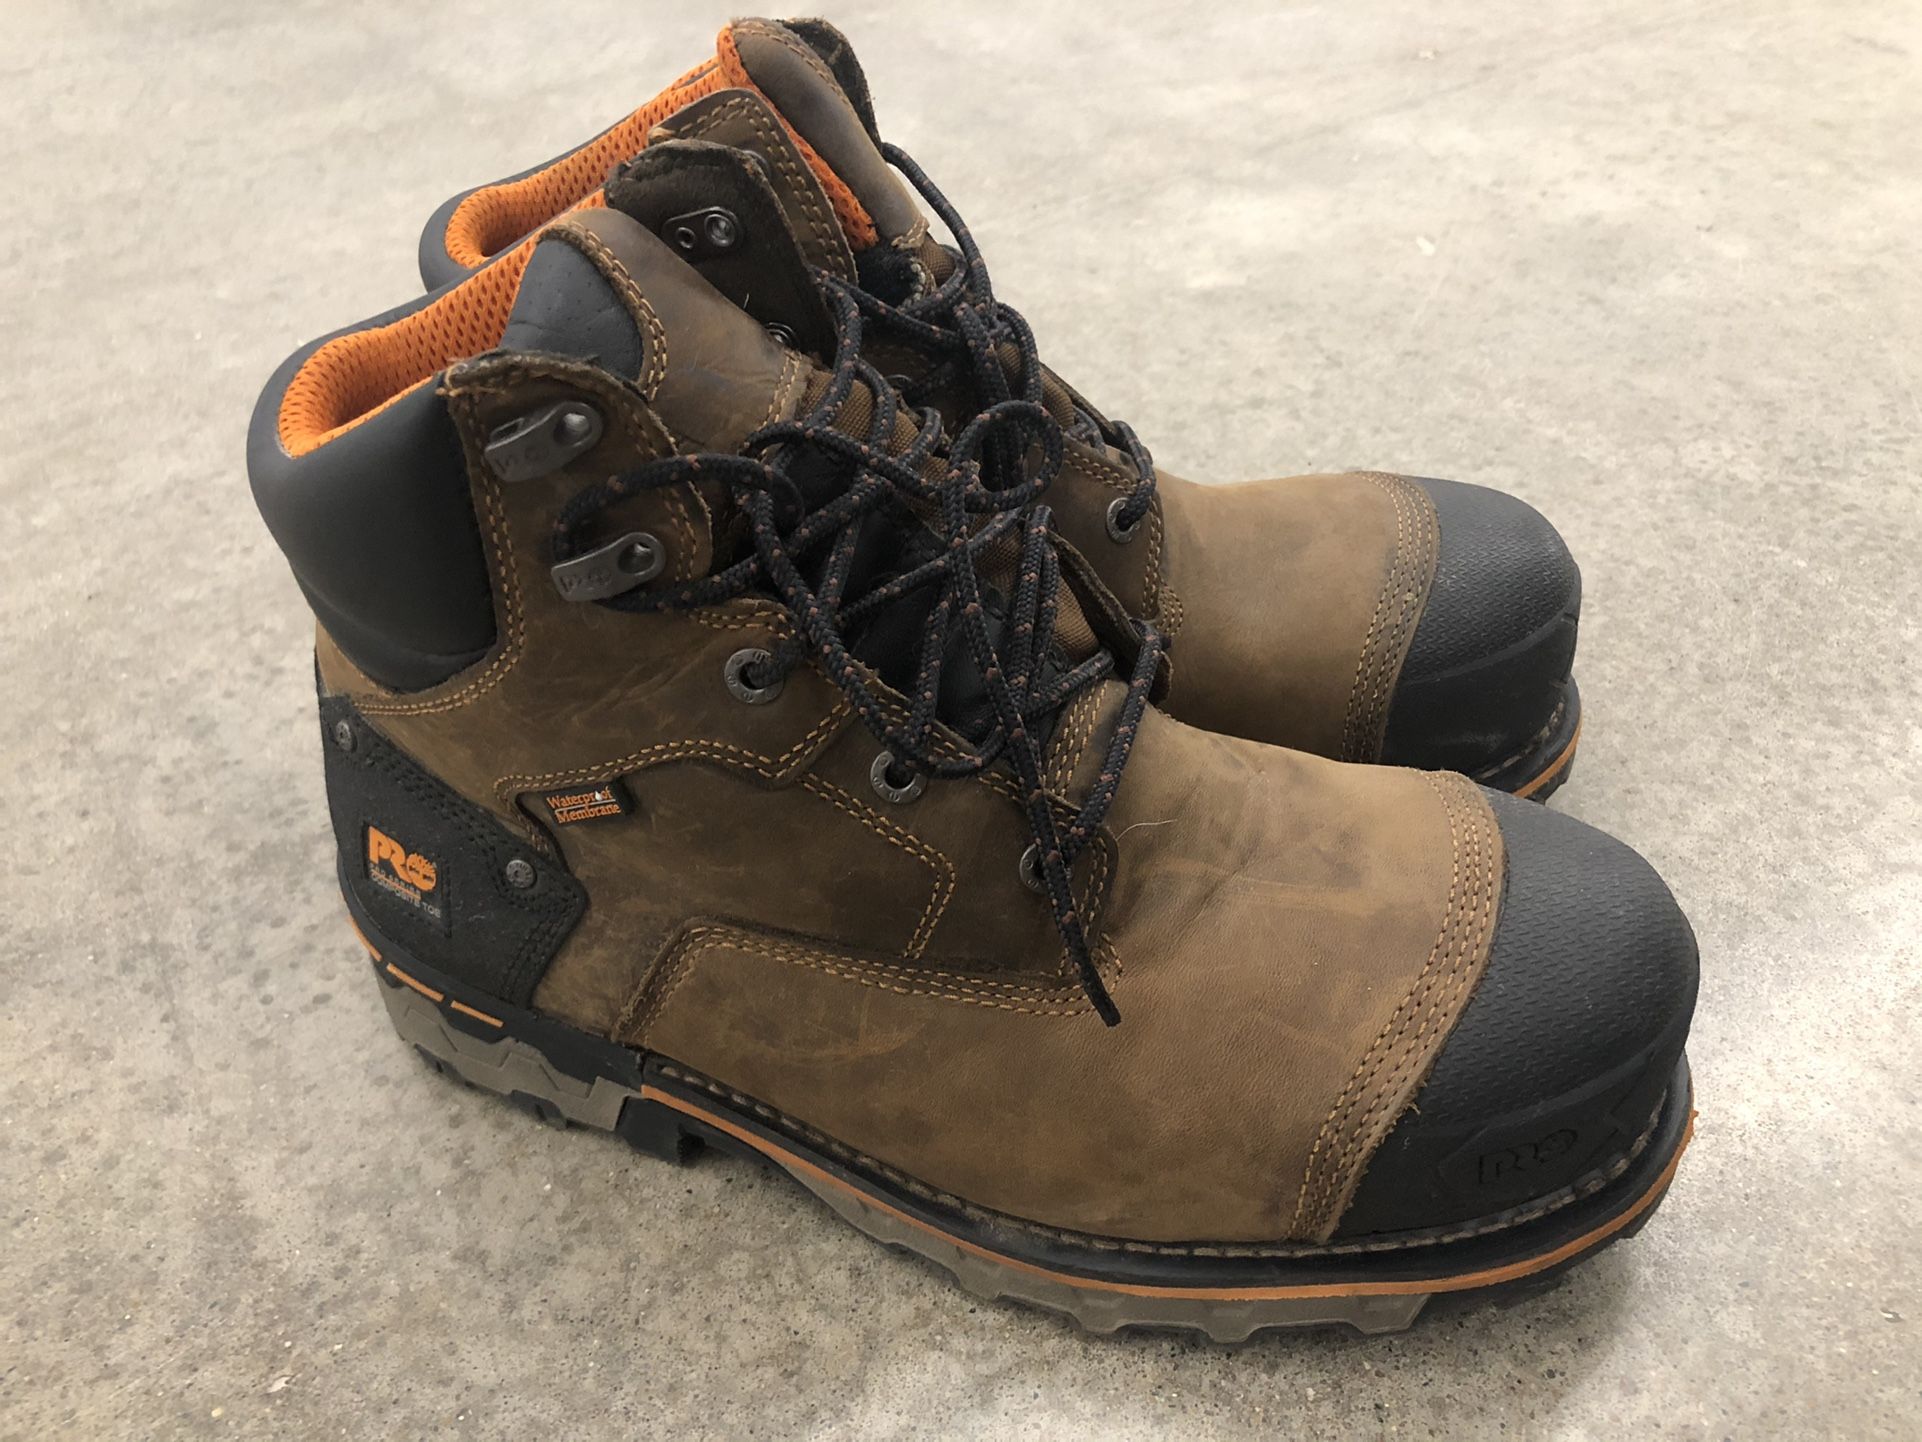 Timberland Pro Series Boots (11.5 Wide) New